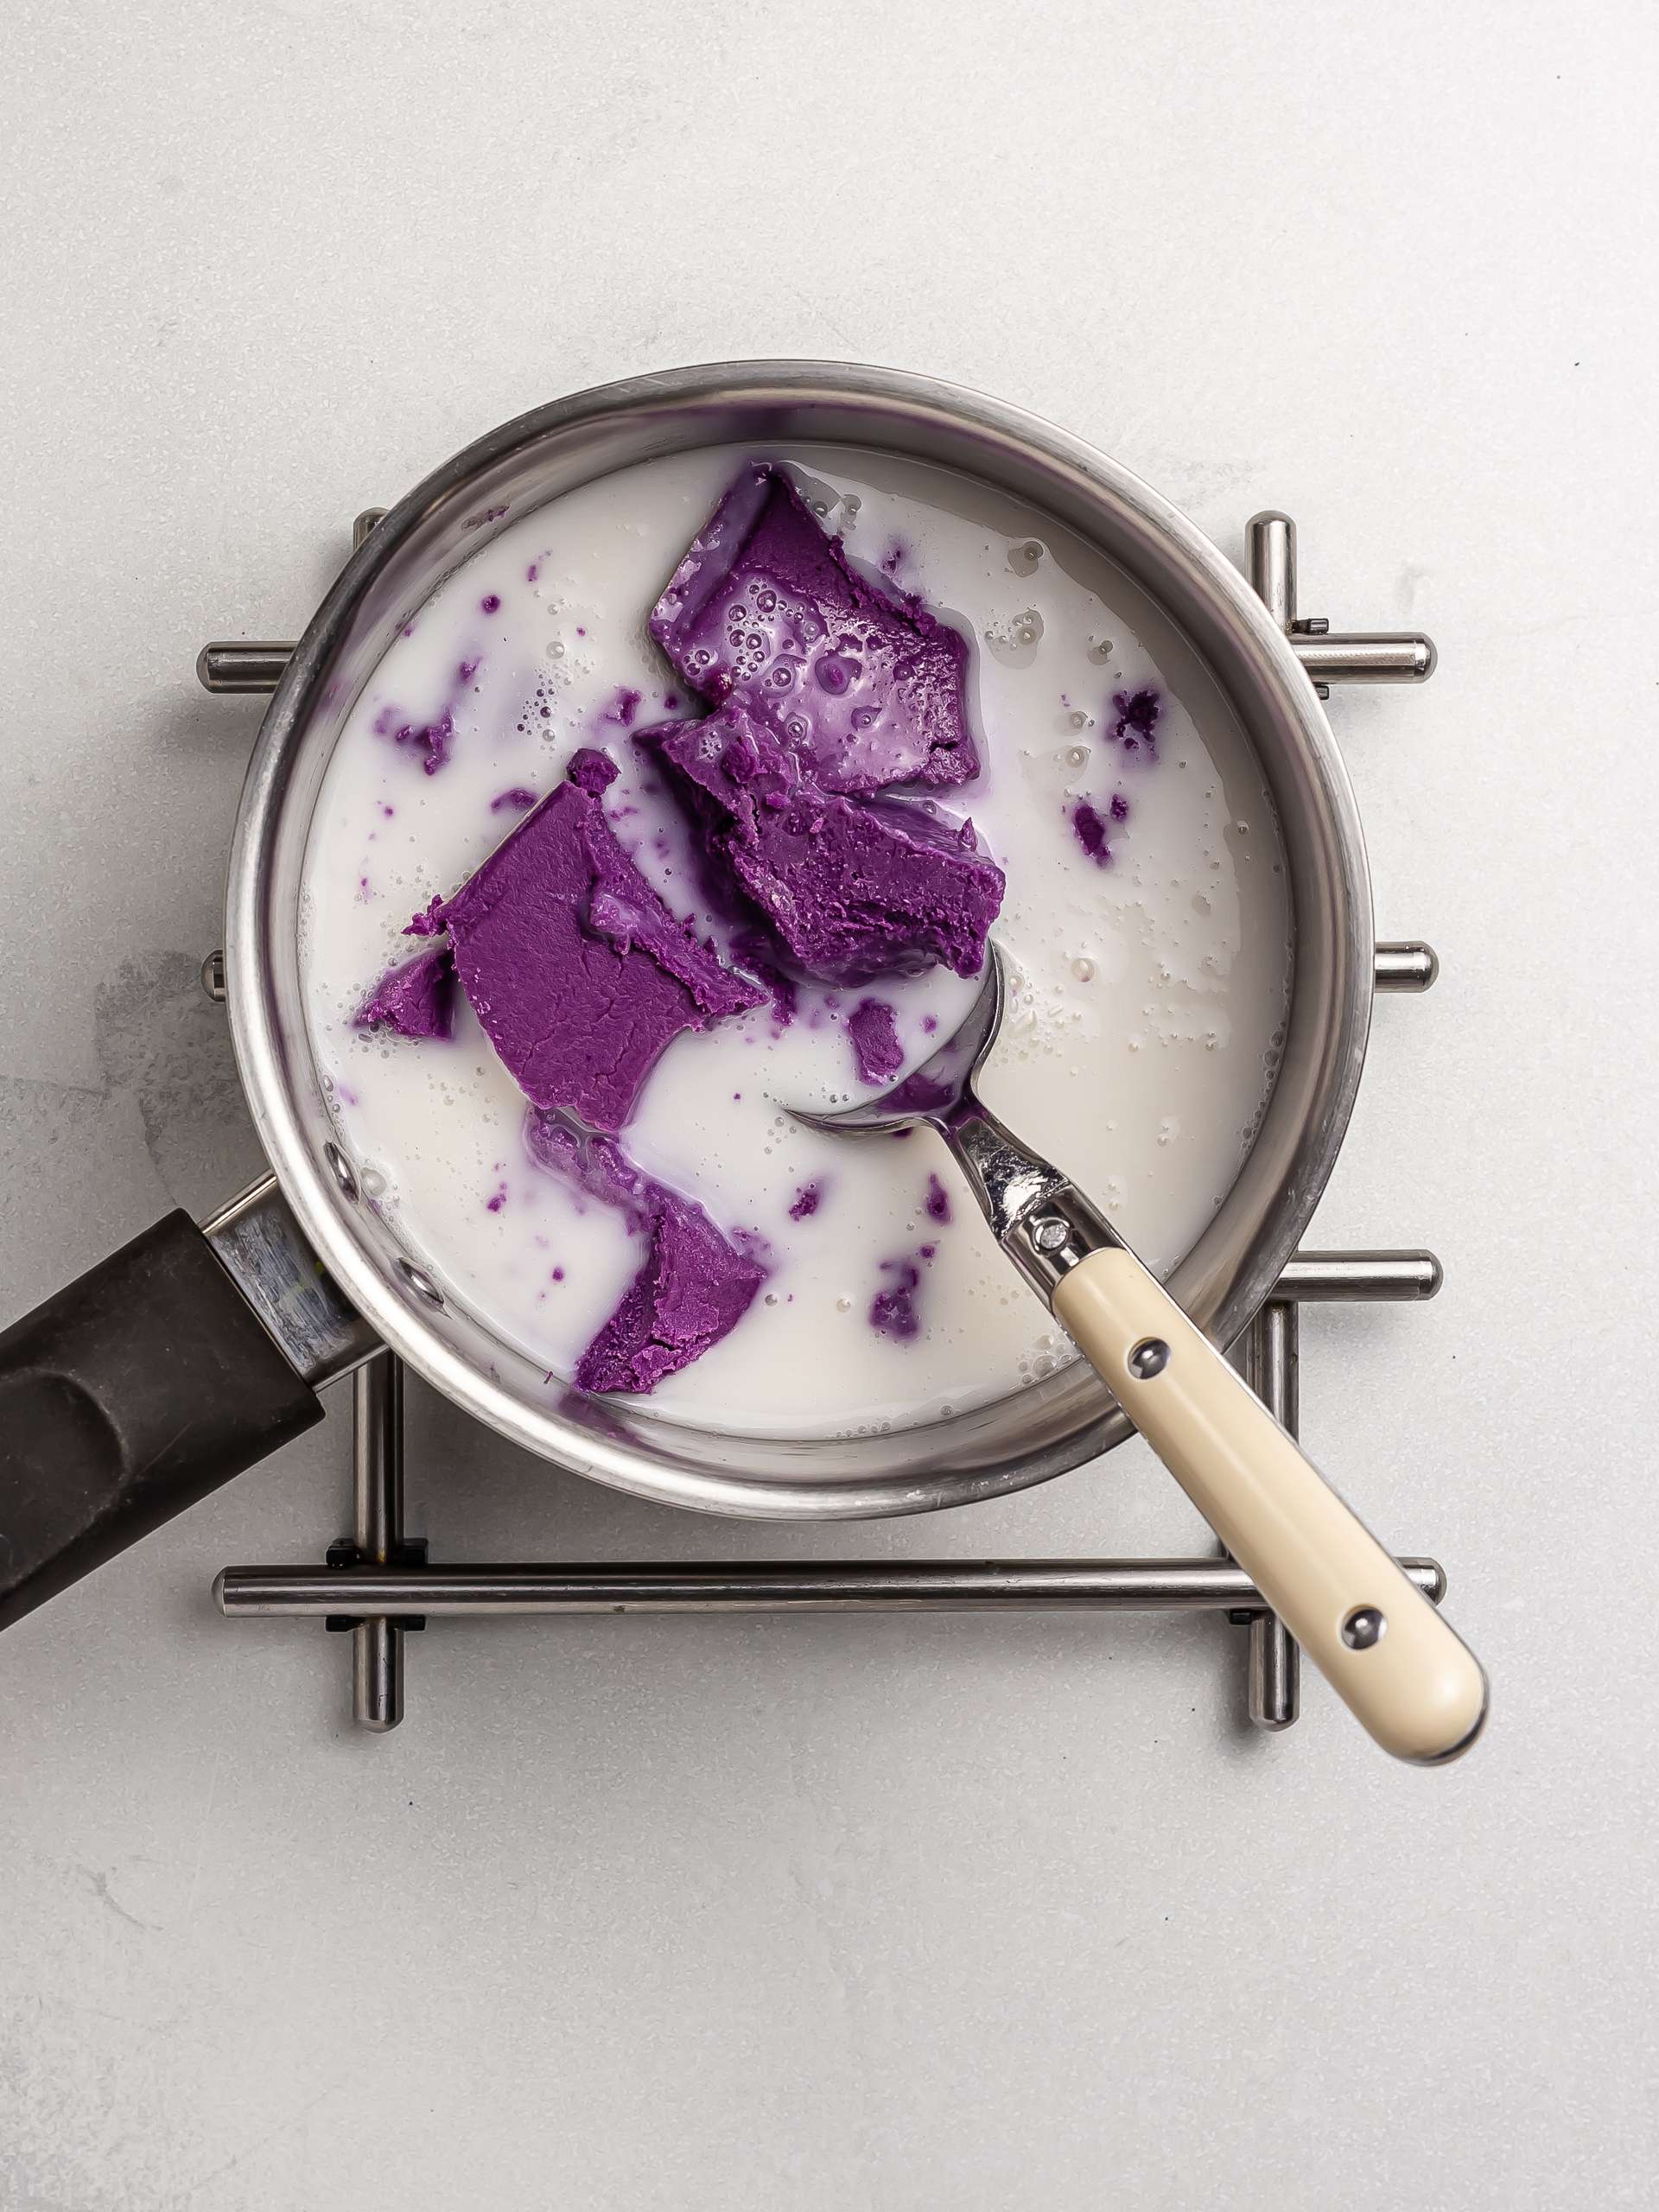 melting ube butter with milk in a pot